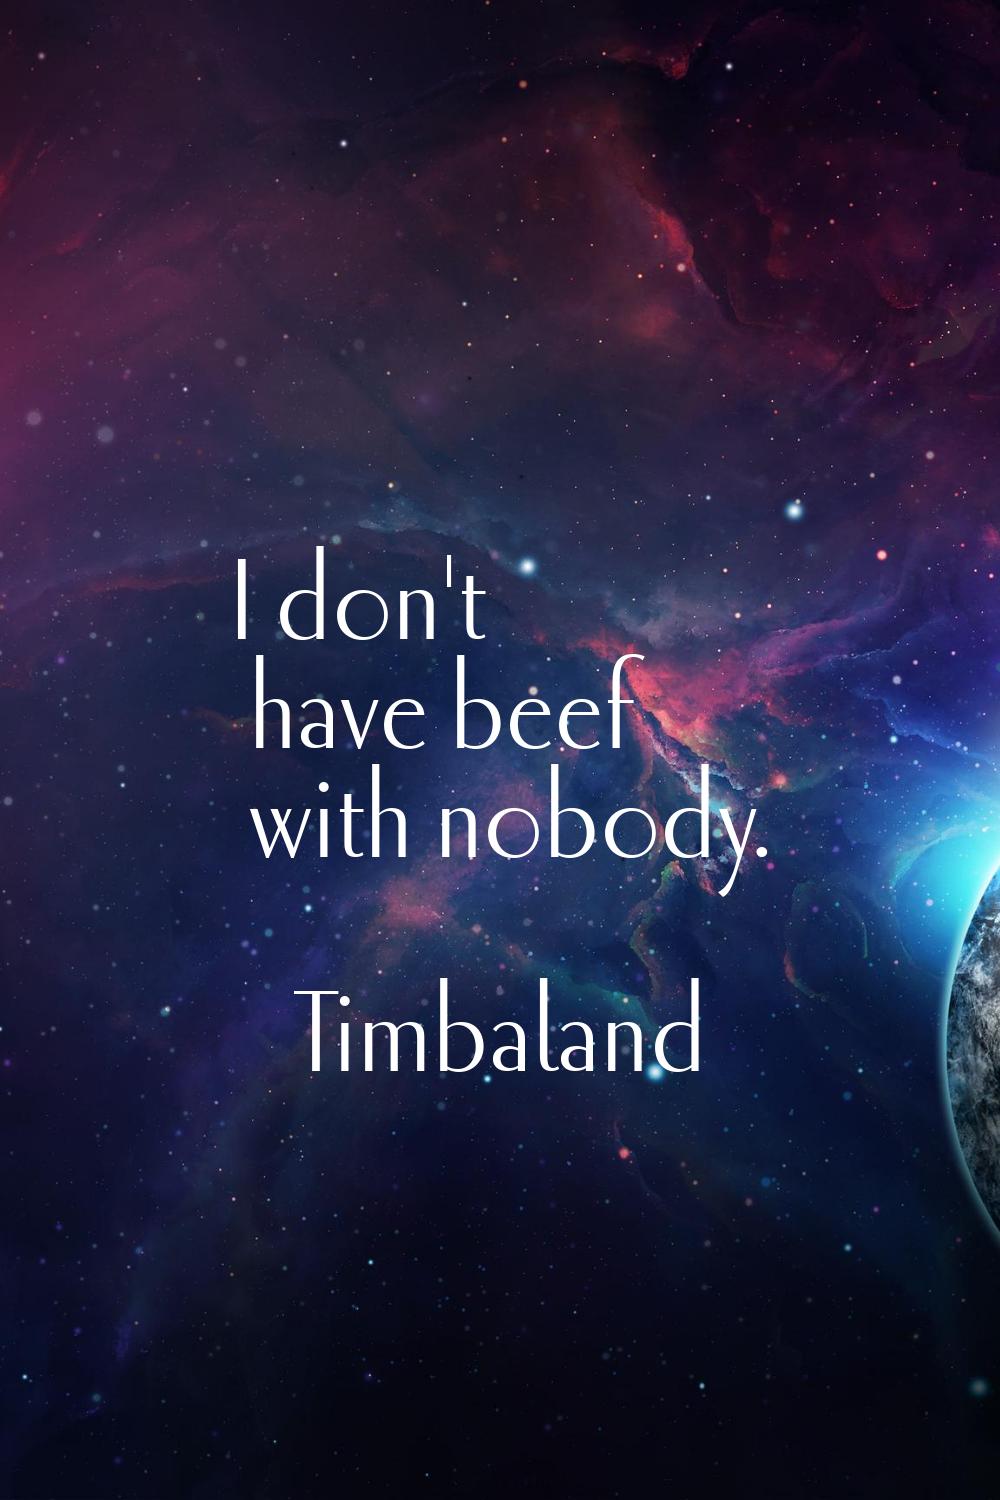 I don't have beef with nobody.